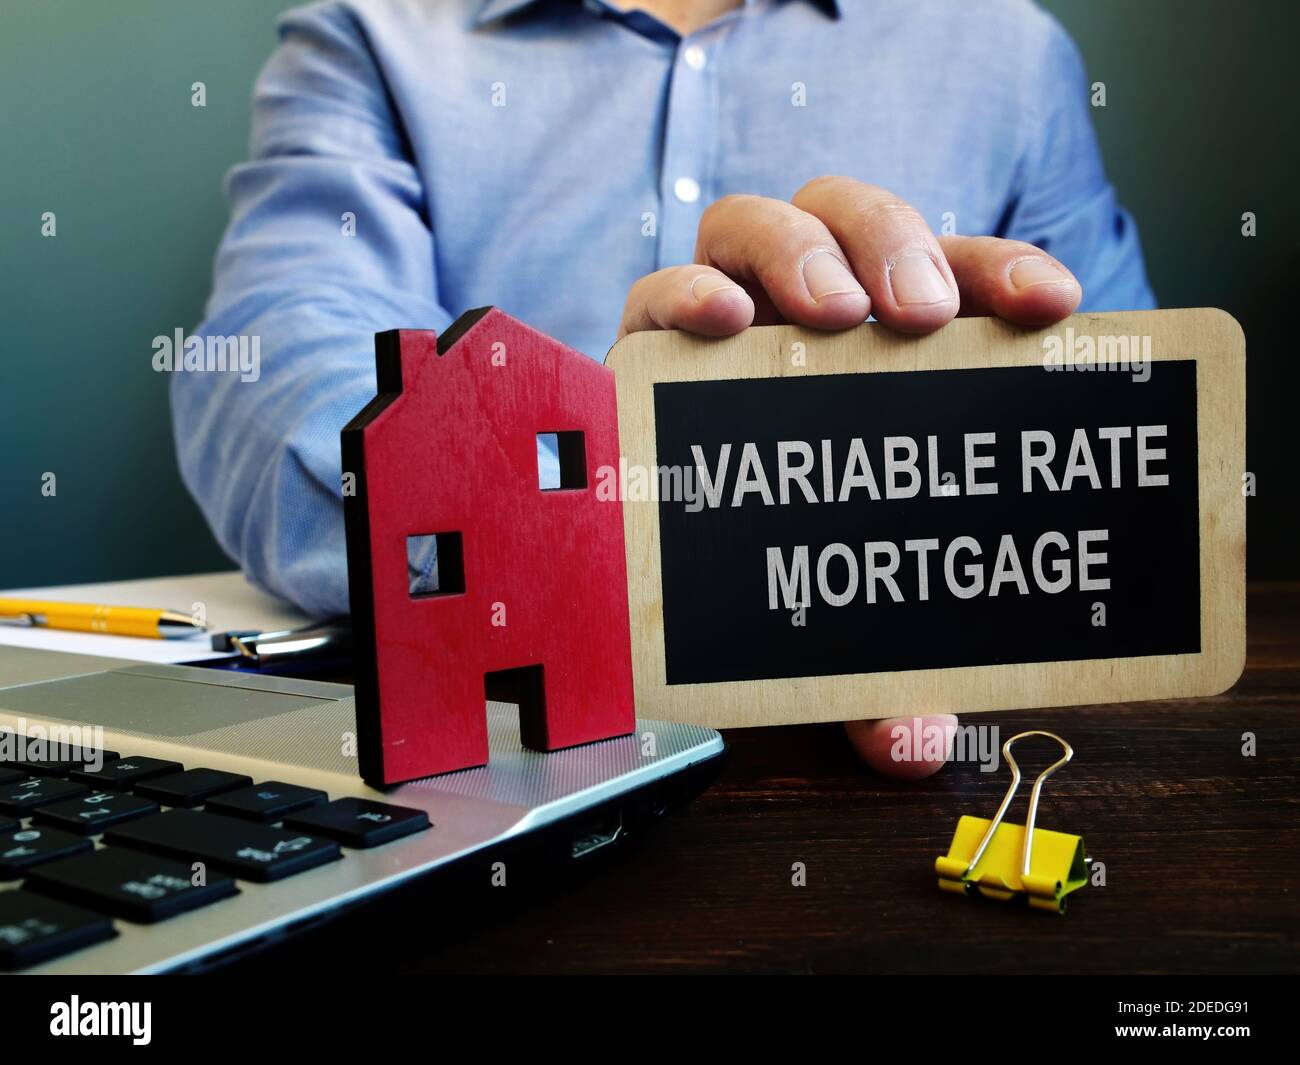 The realtor offers Variable rate mortgage and holds plate. Stock Photo